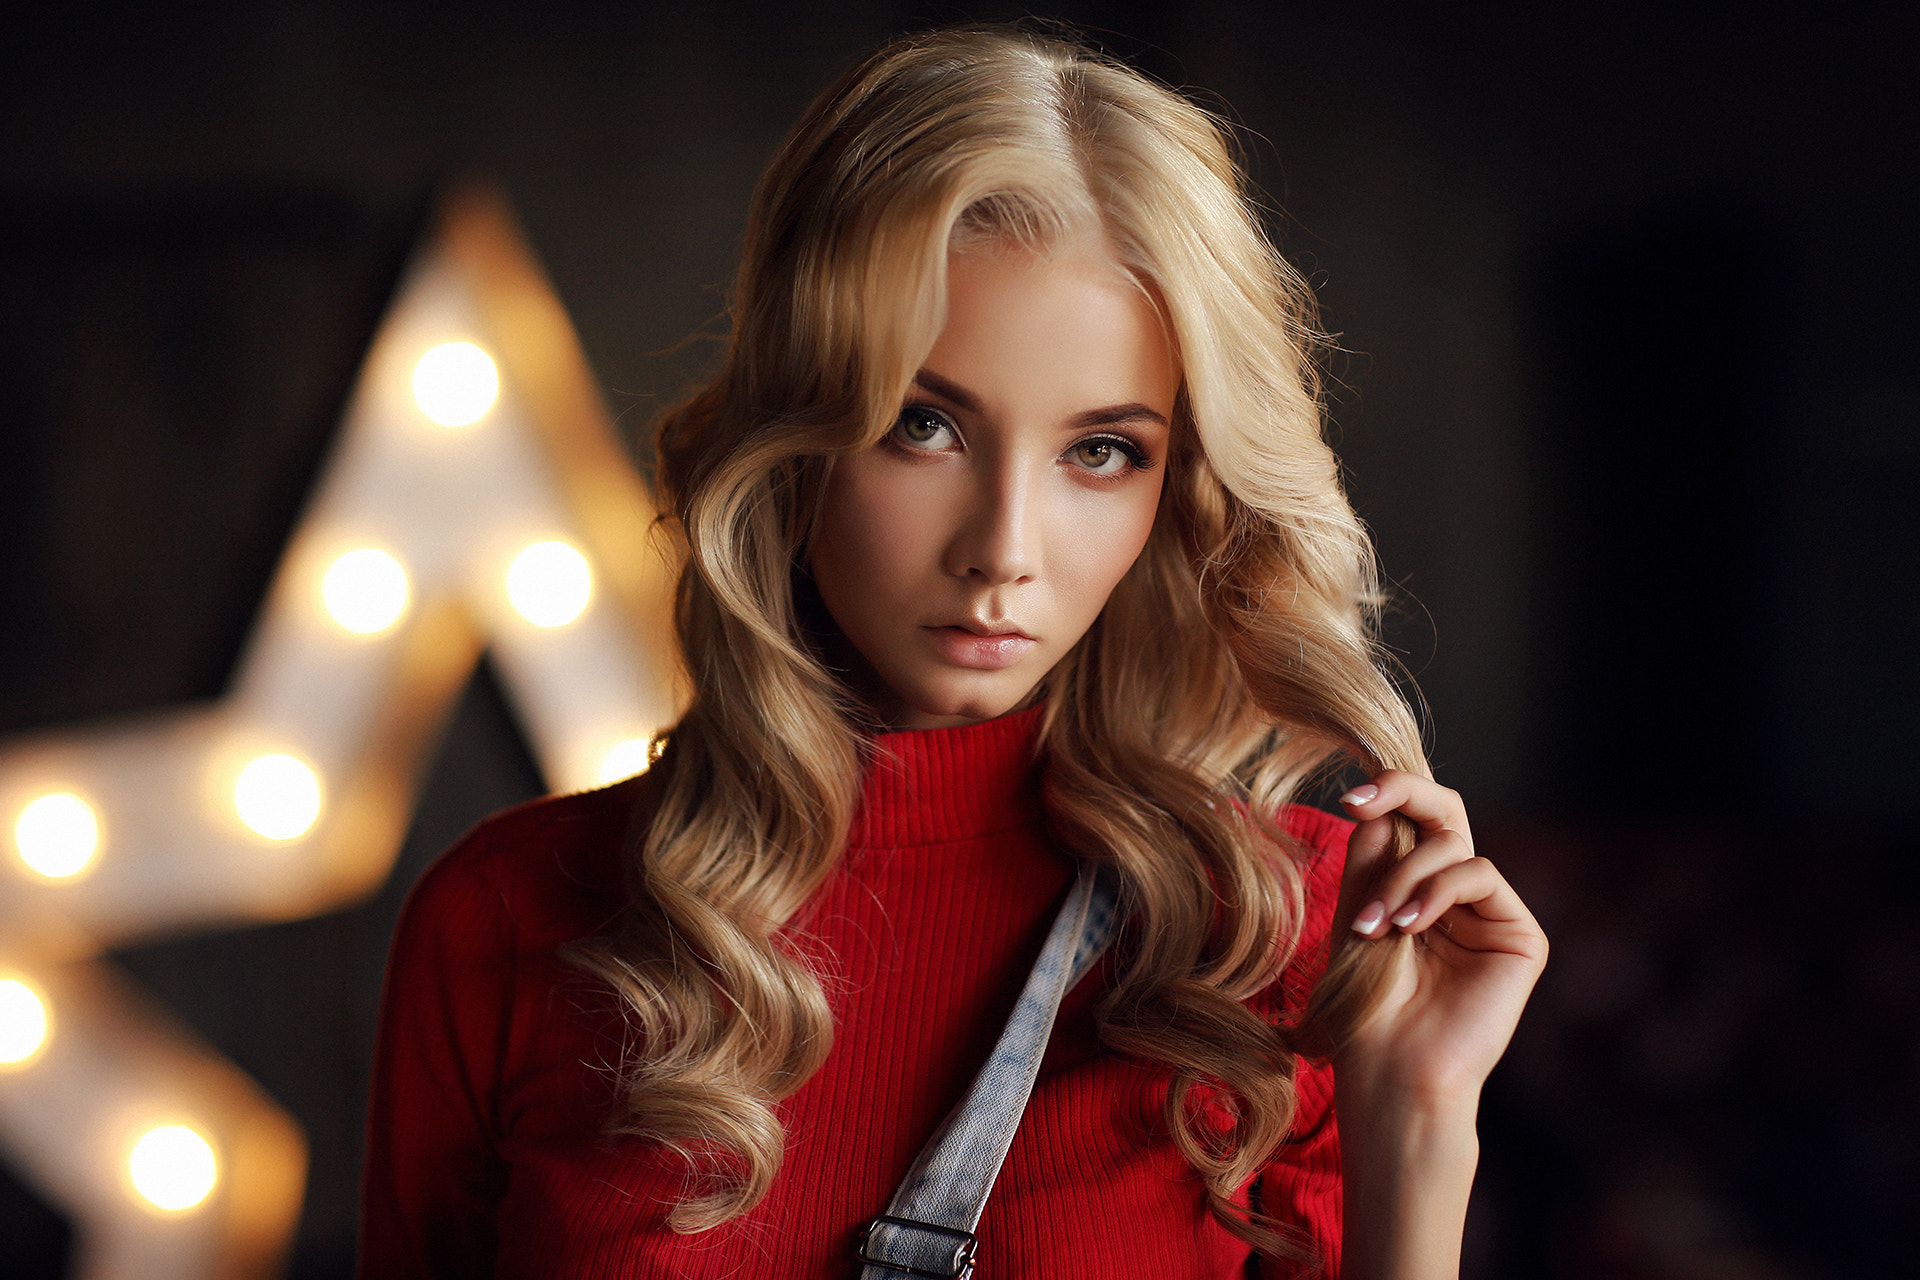 Women Blonde Portrait Overalls Dmitry Arhar Red Sweater Katerina Katerina Model Kate Looking At View 1920x1280